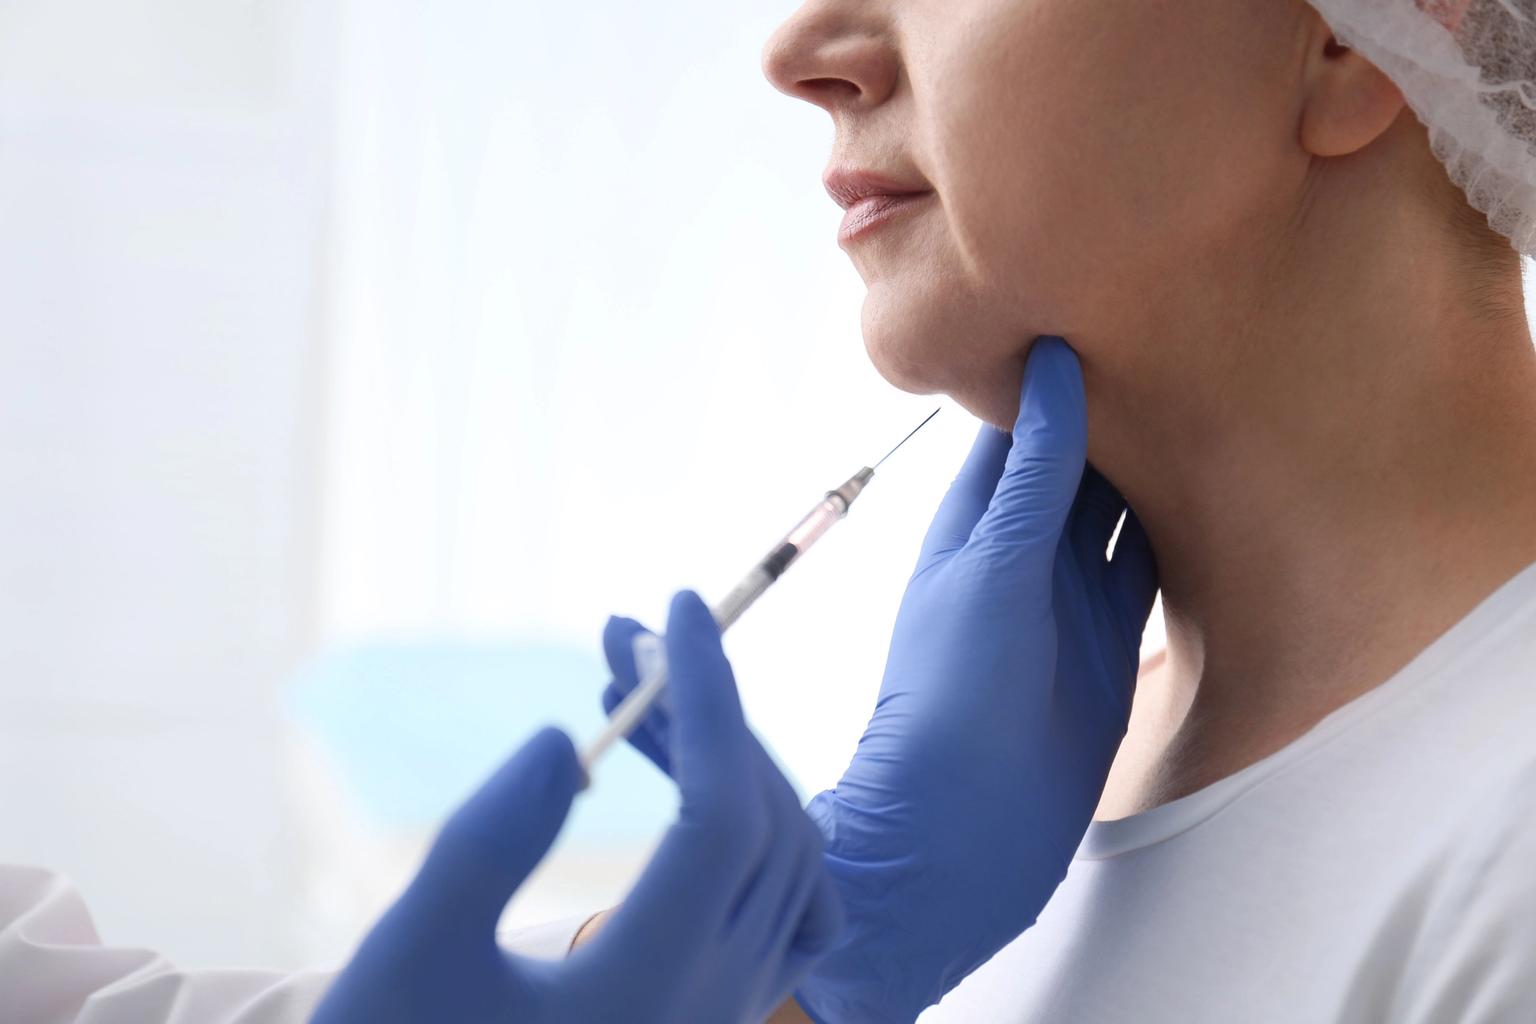 Fat dissolving injections for double chin